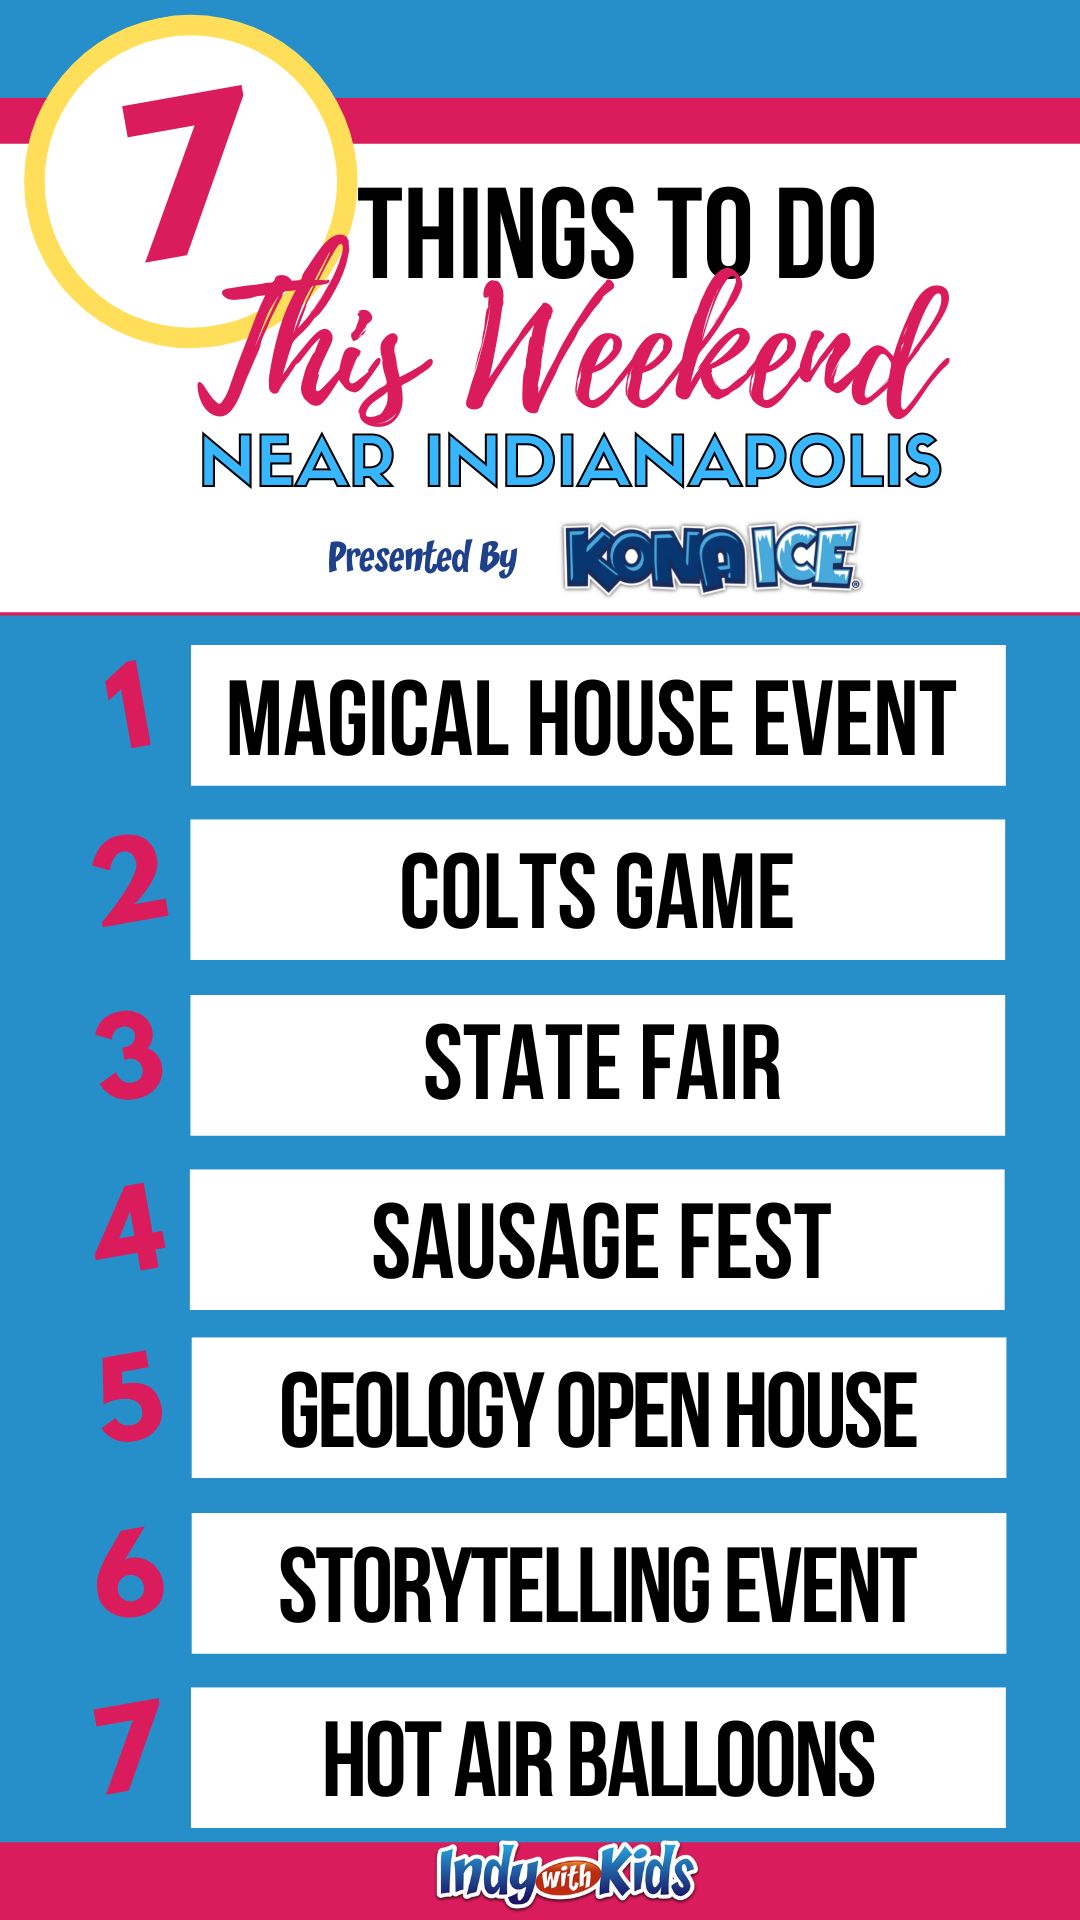 Things to do this Weekend in Indy August 19-21